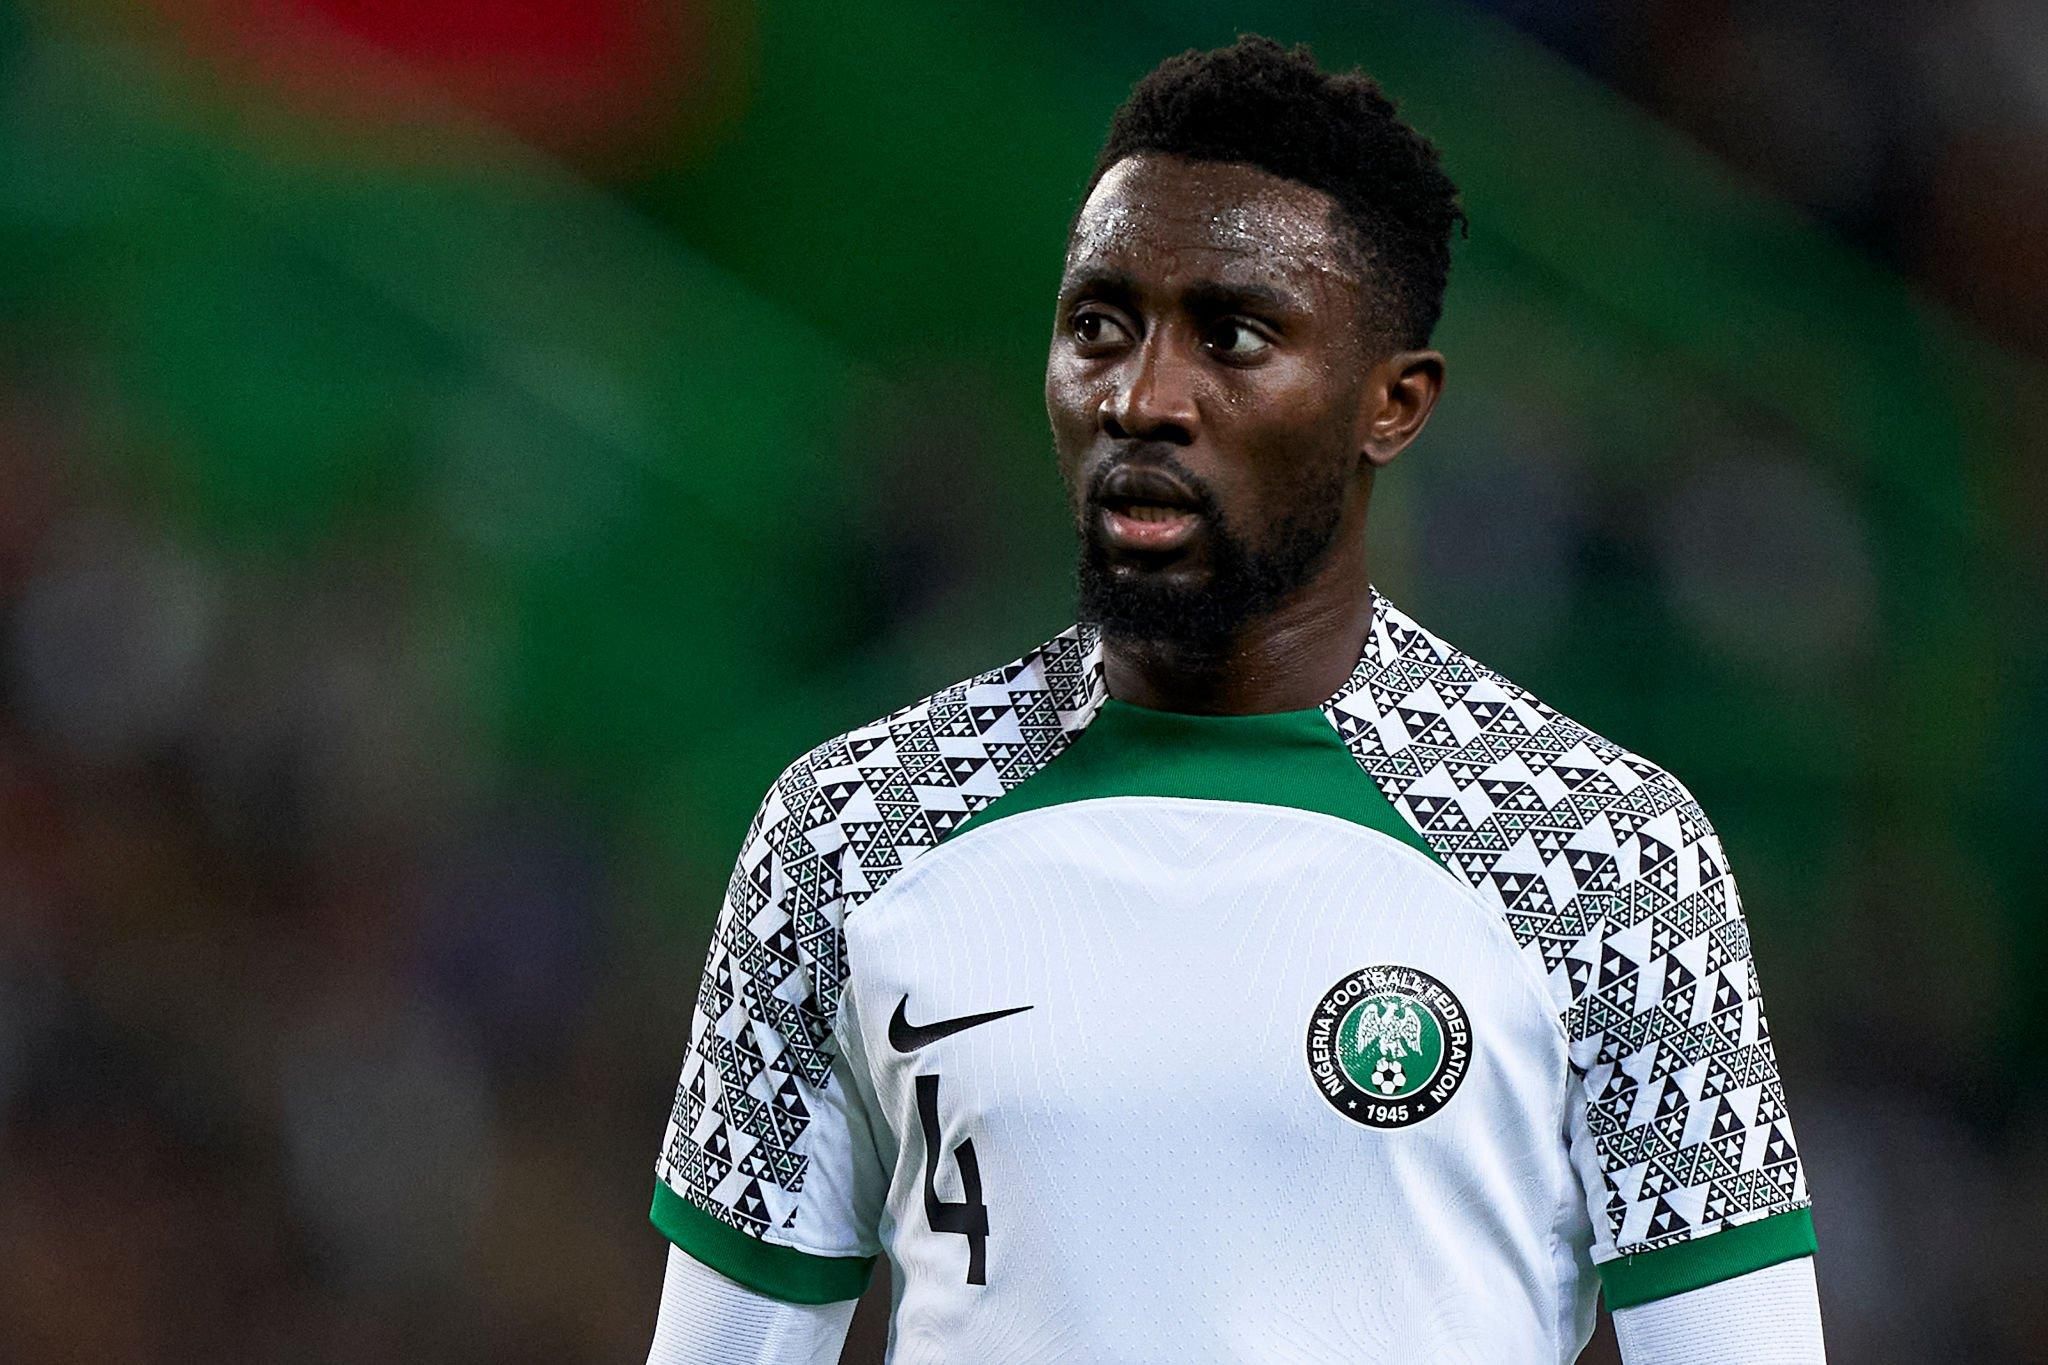 Wilfred Ndidi visit Golden Eaglets camp, motivates players - Pulse Sports  Nigeria